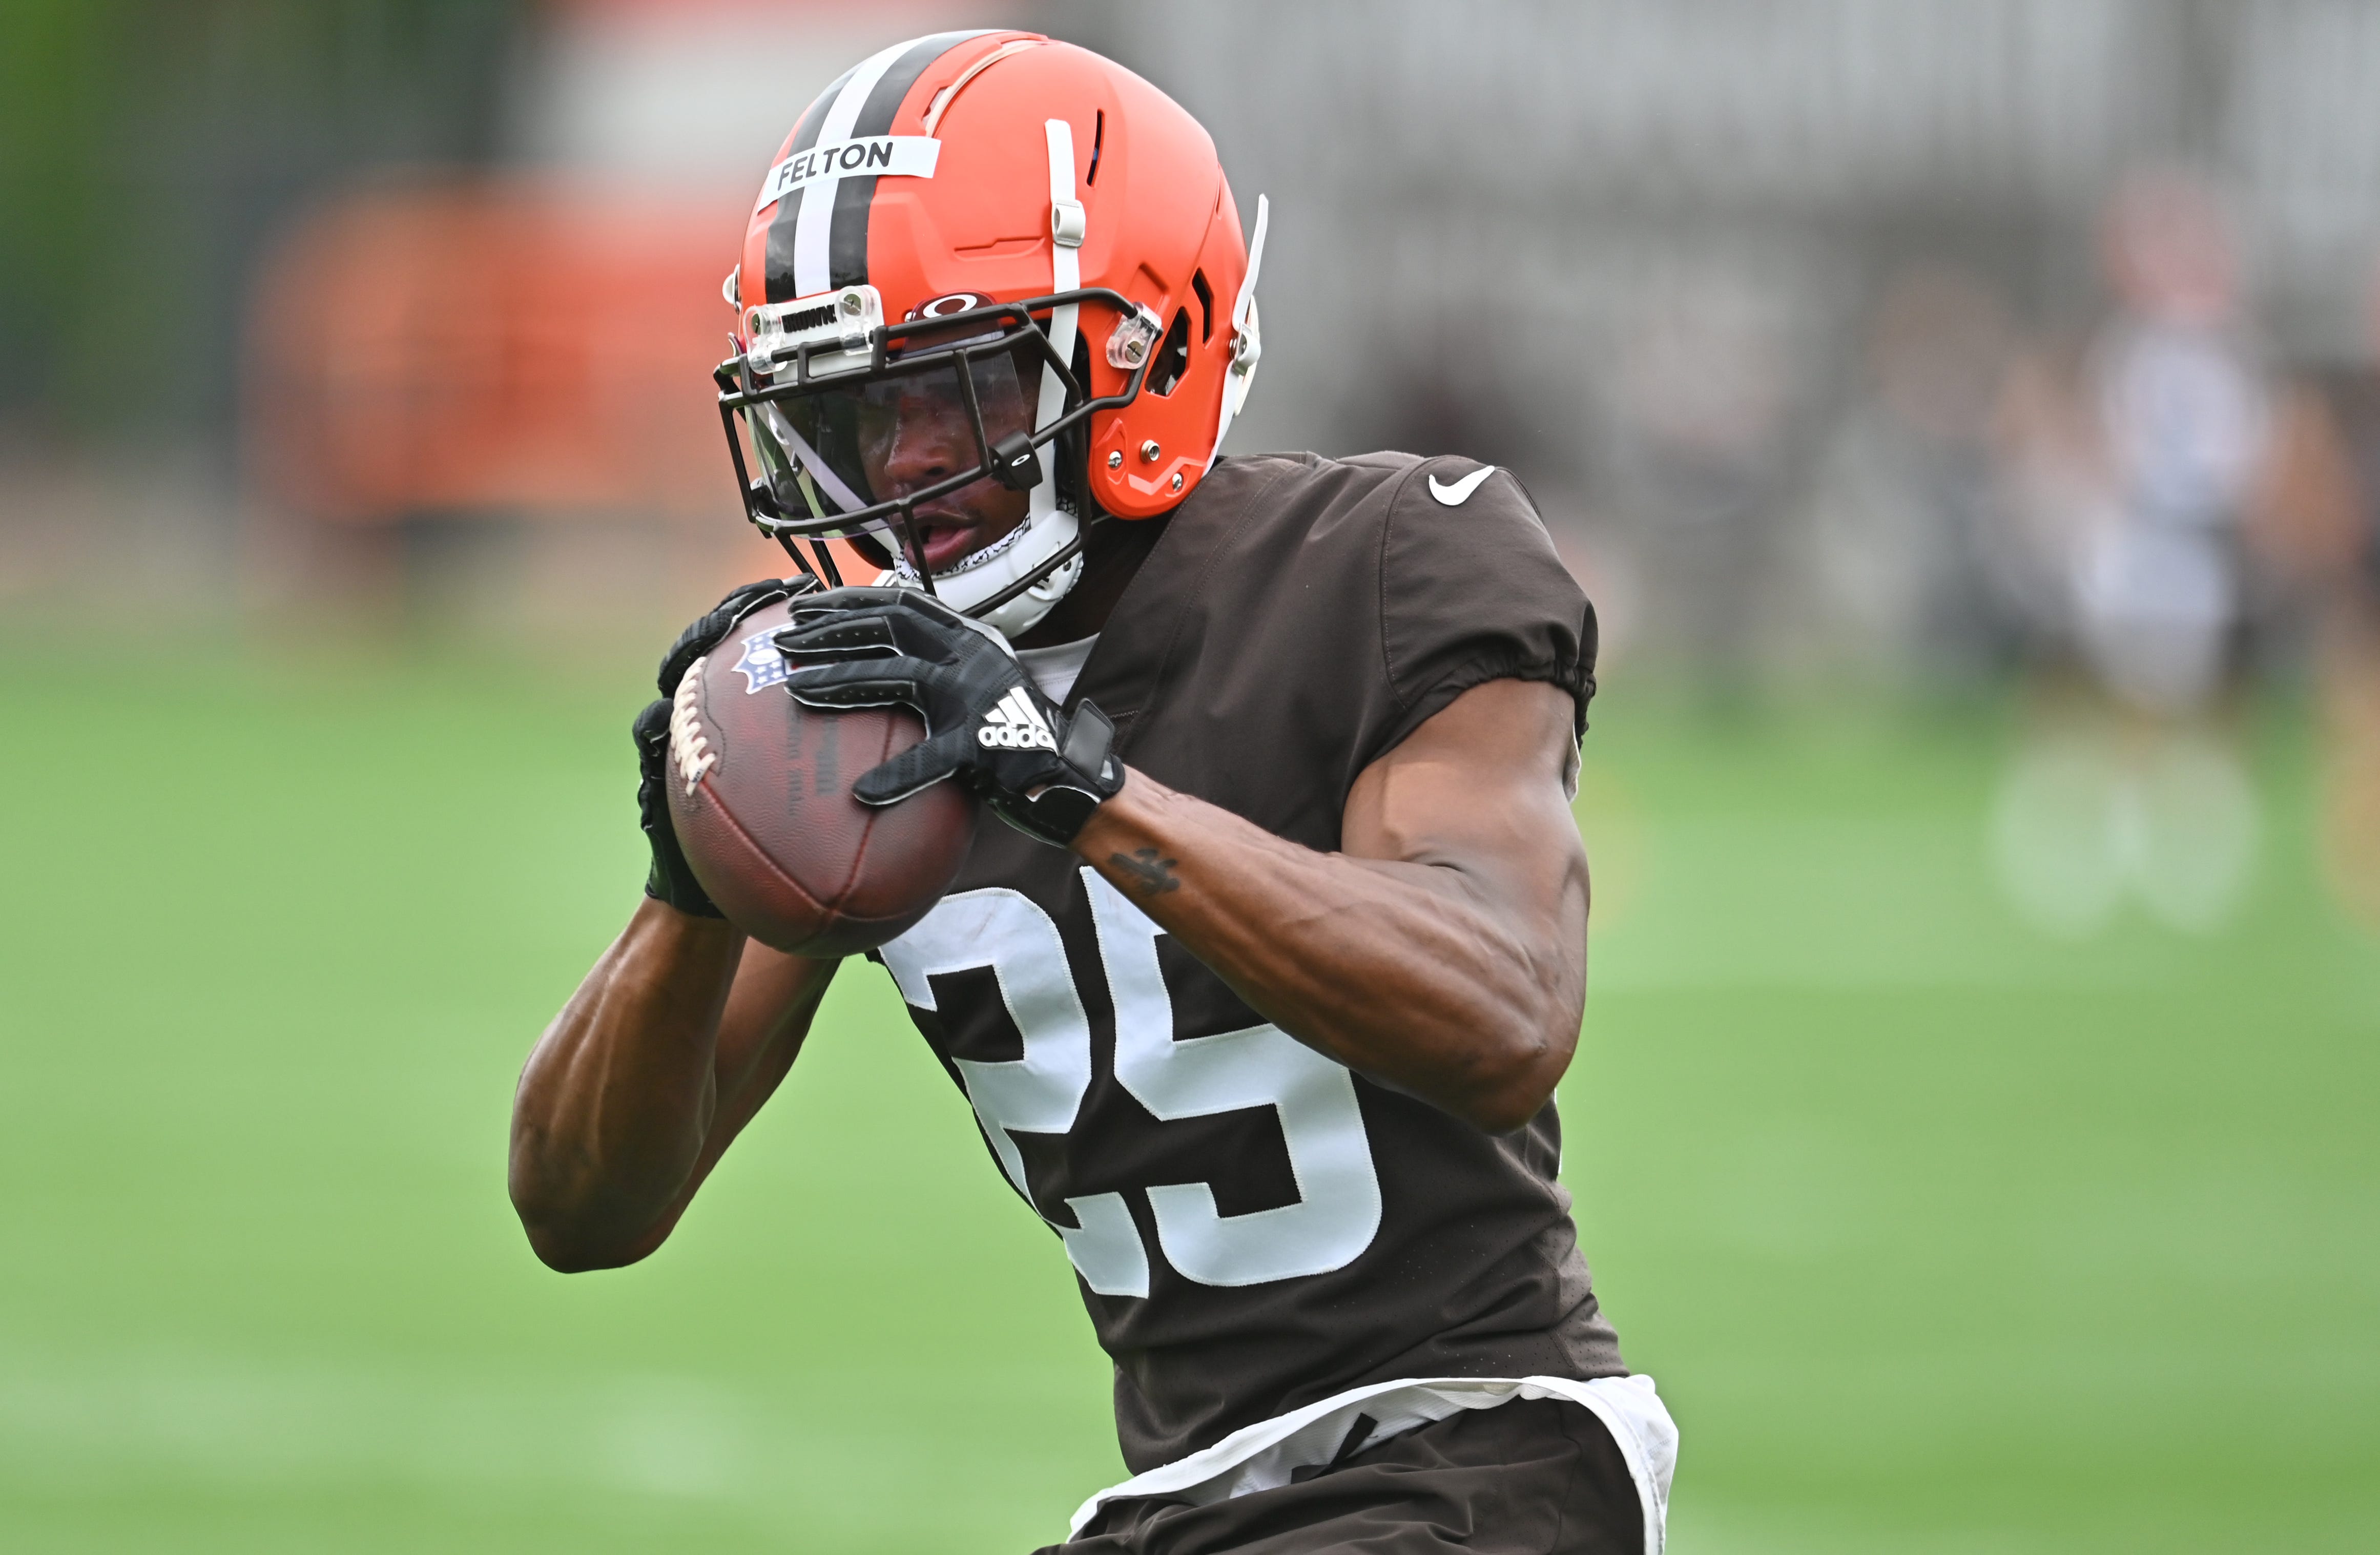 Cleveland Browns playmaker Demetric Felton Jr. applies father's military values to football